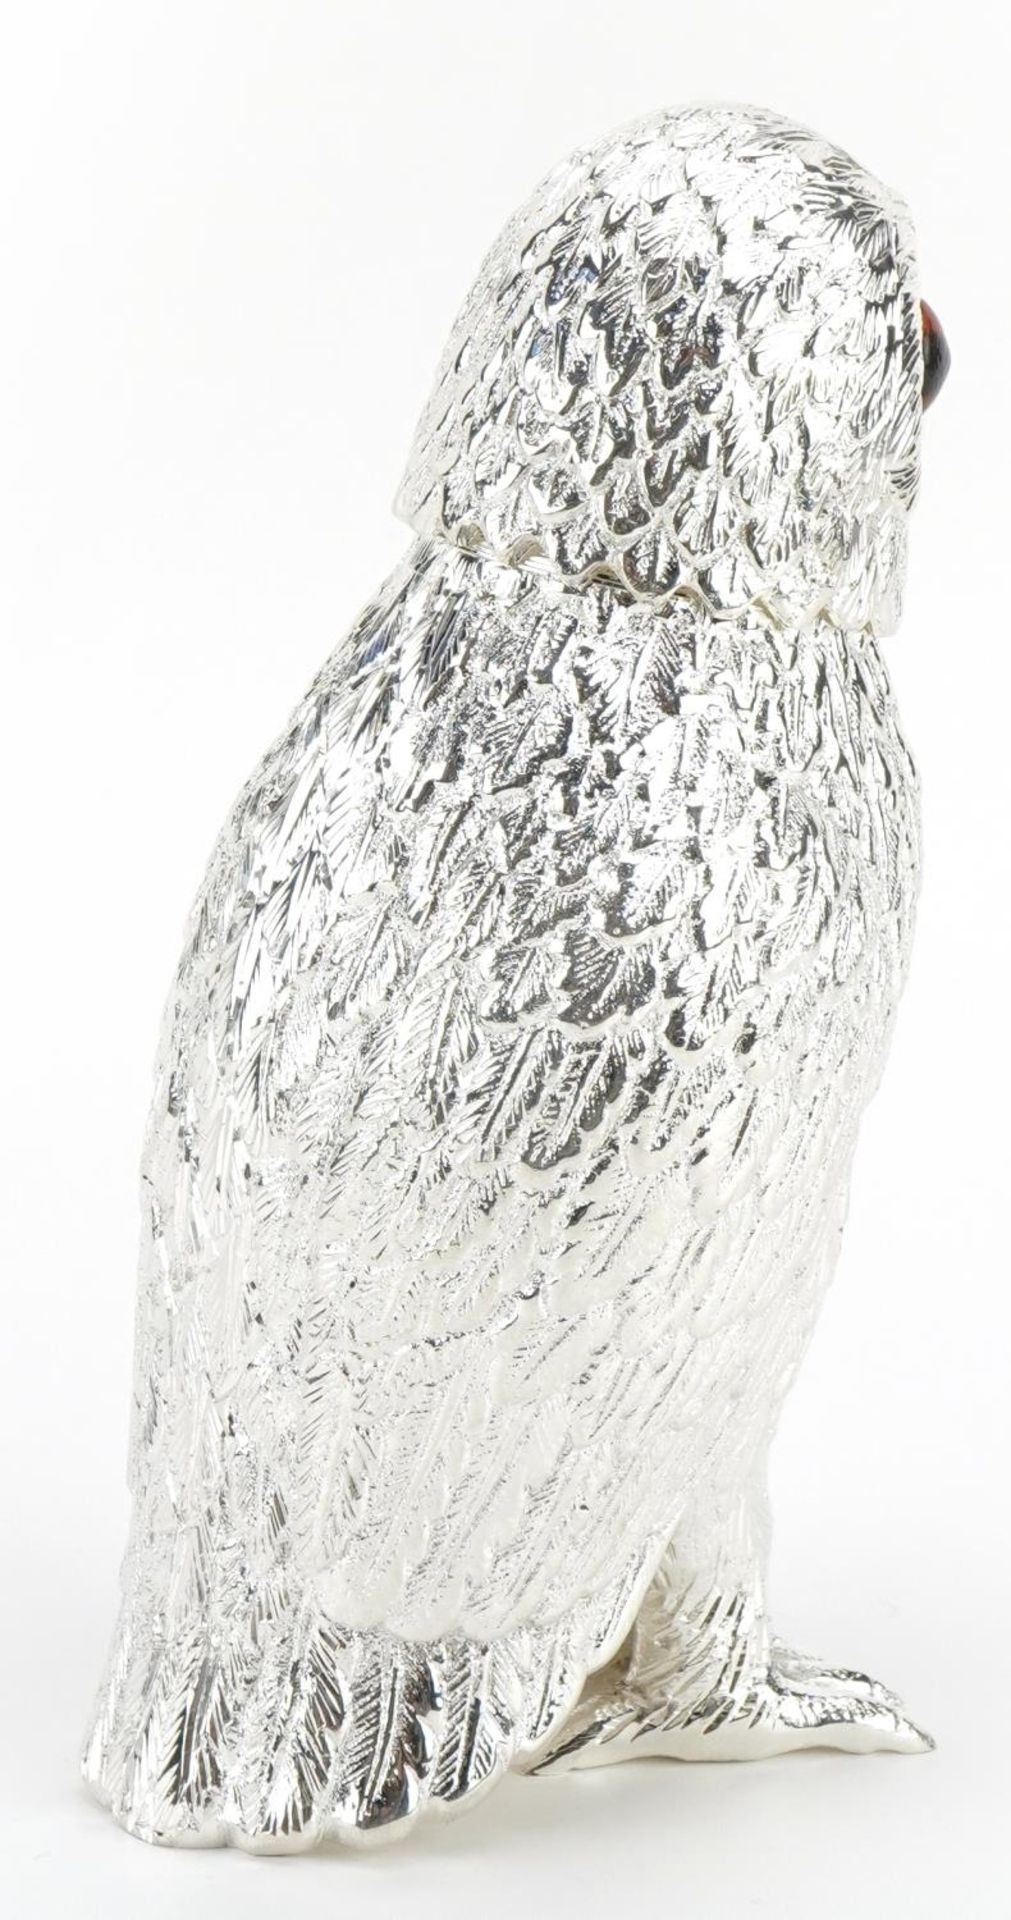 Novelty silver plated caster in the form of an owl, 15cm high - Bild 2 aus 4